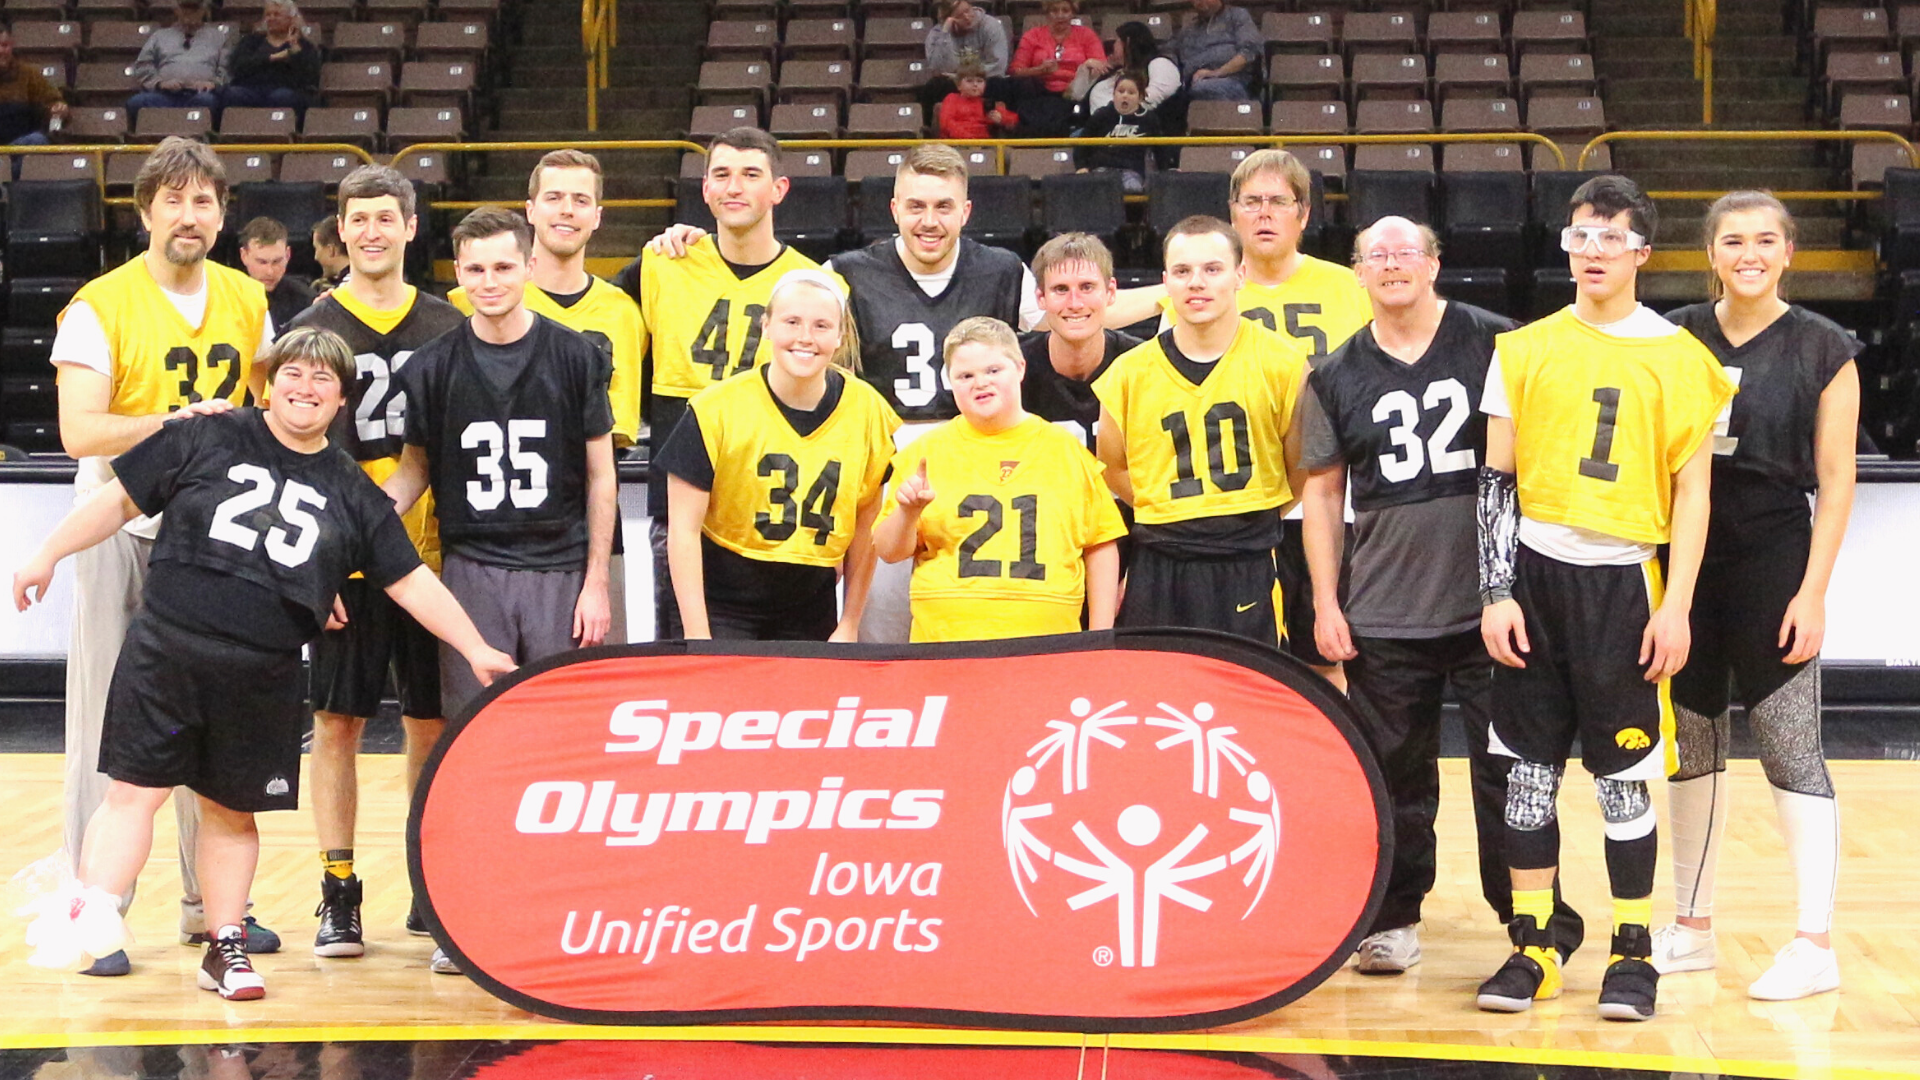 Special Olympics Iowa Unified Sports in front of champion unified athletics basketball team.